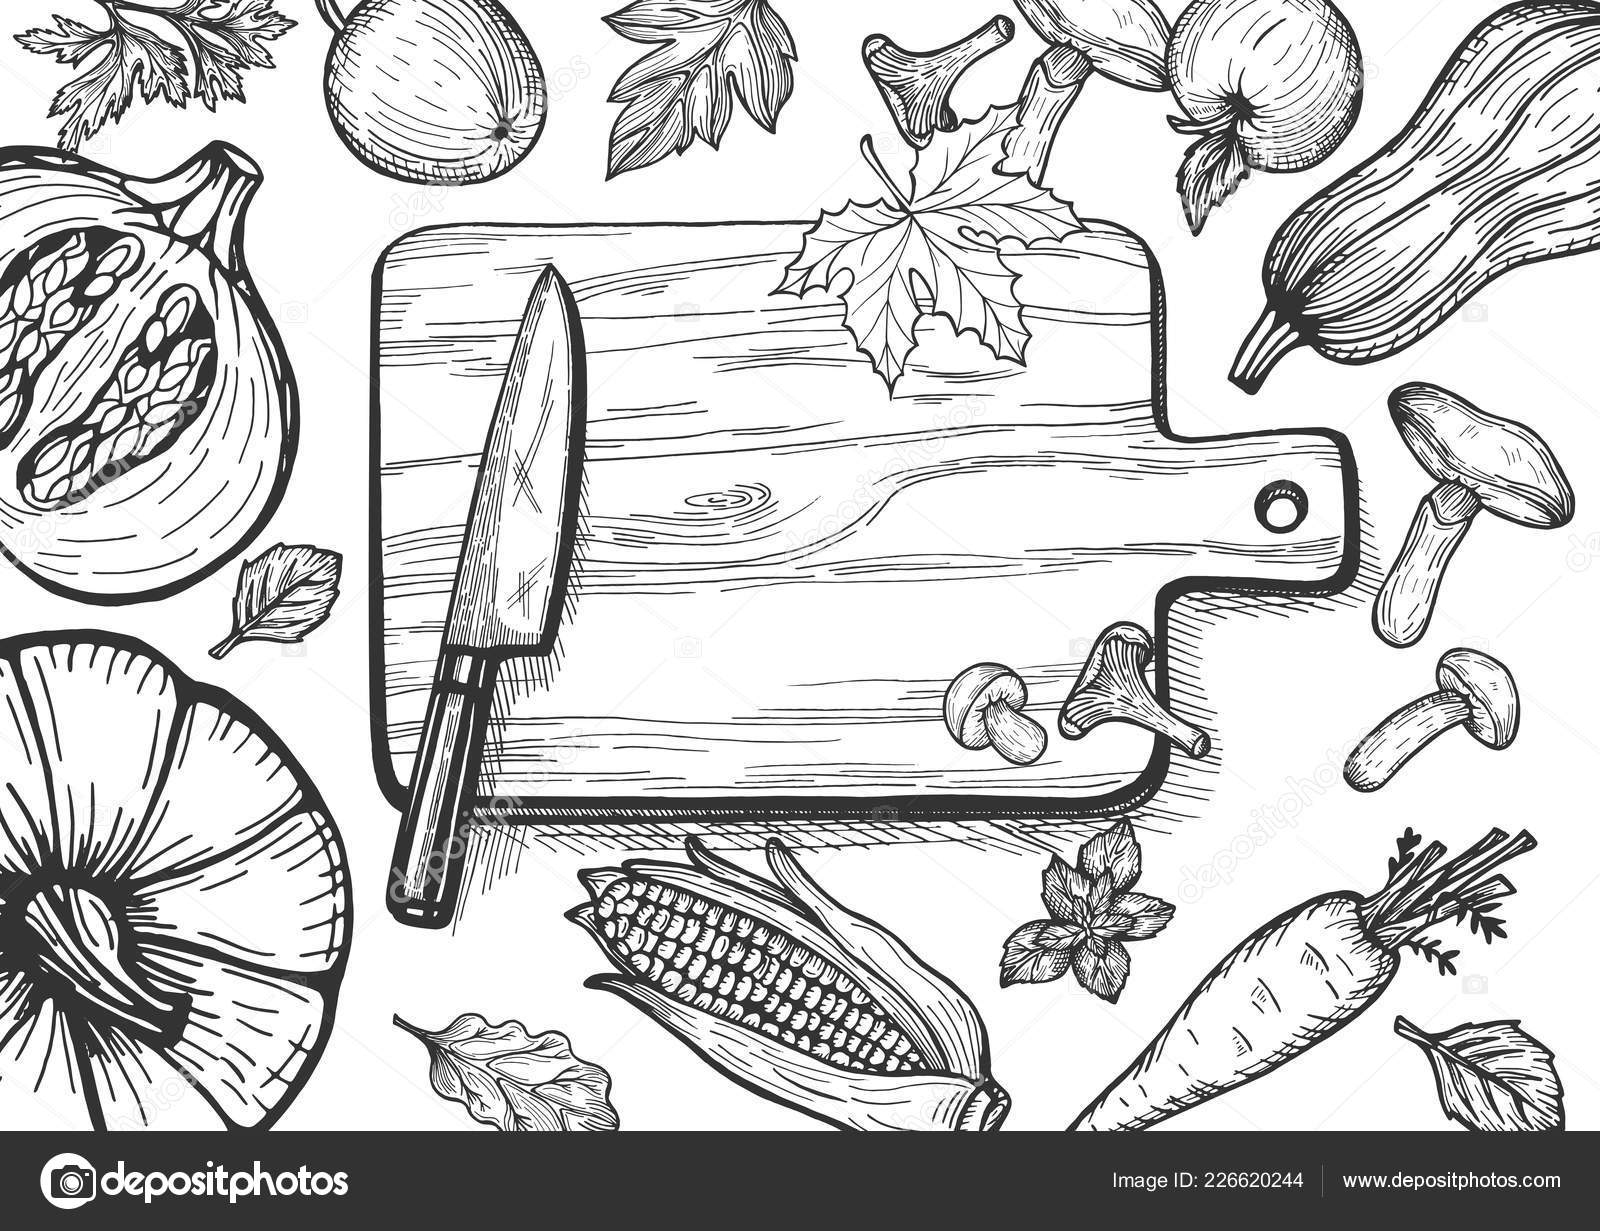 THE ART OF CHOPPING VEGETABLES Finchley Kitchens Designs